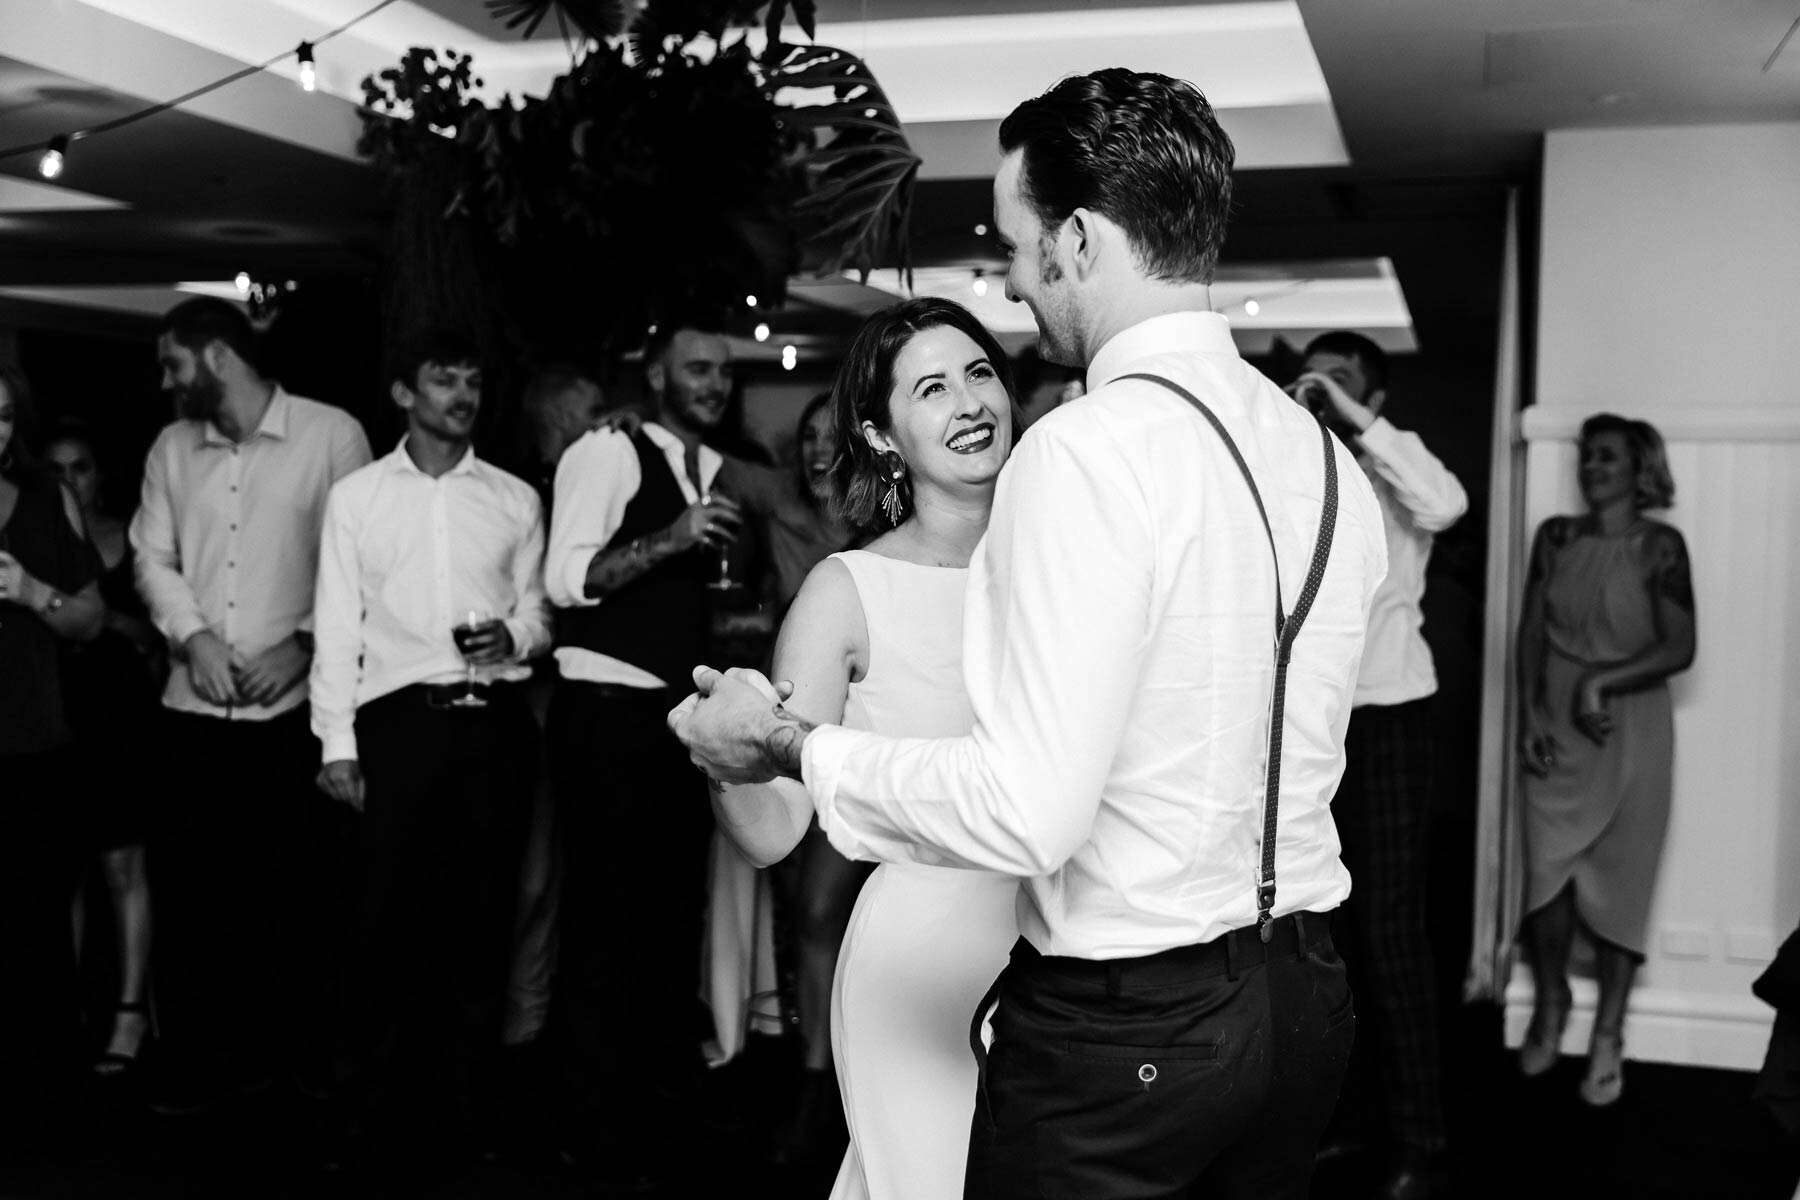 Port Stephens wedding with lush tropical vibes at The Anchorage